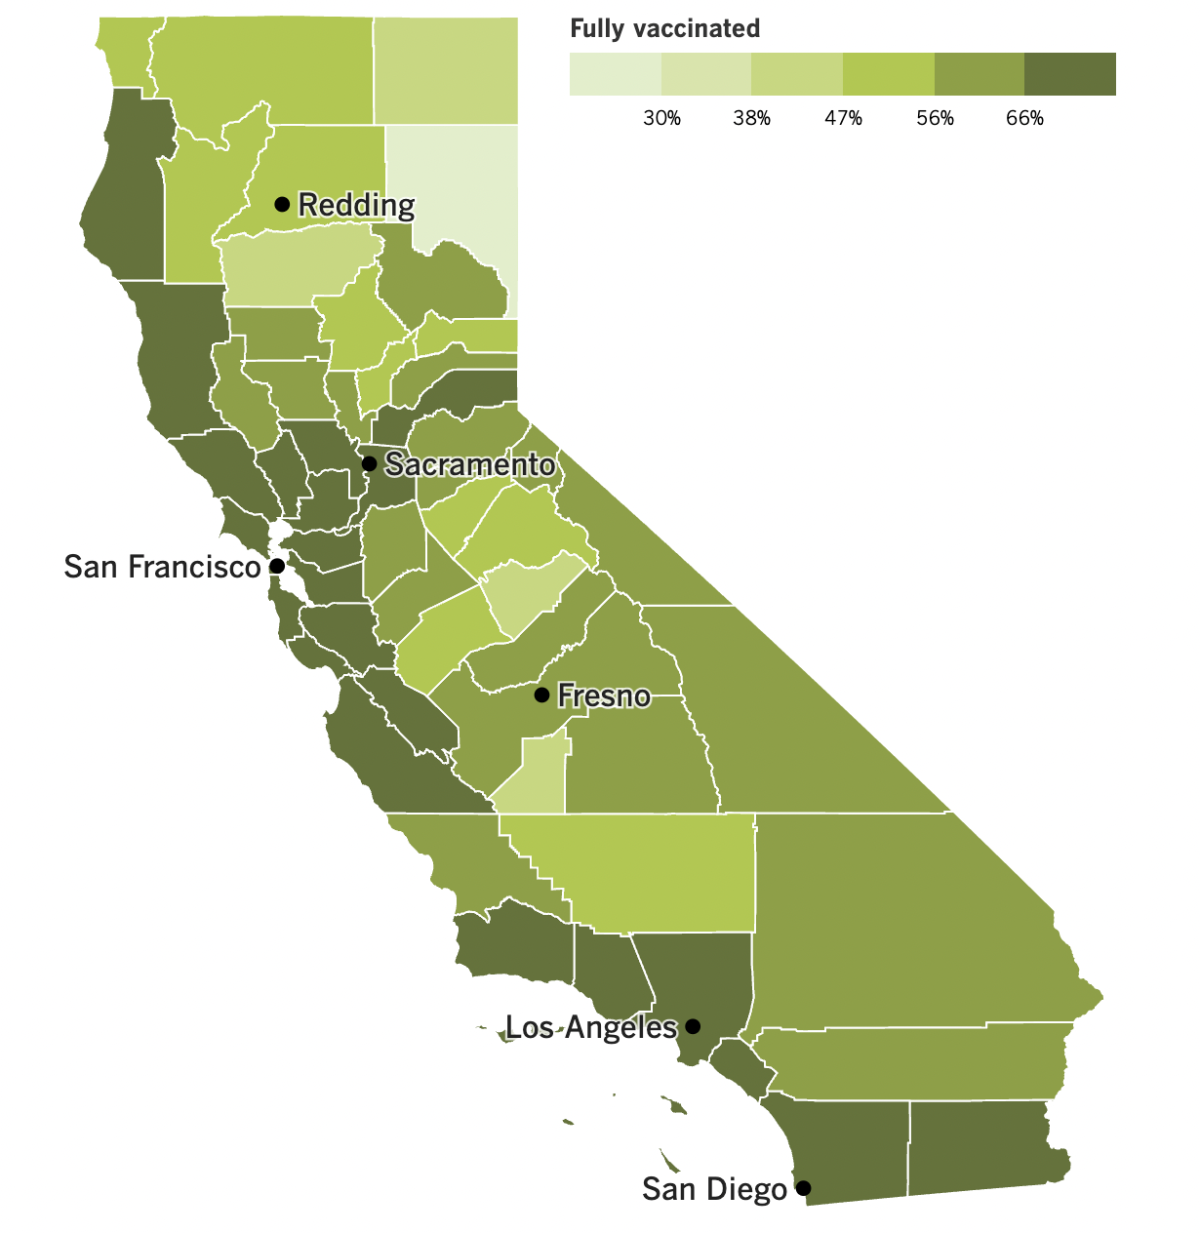 A map showing California's COVID-19 vaccination progress by county as of Aug. 23, 2022.